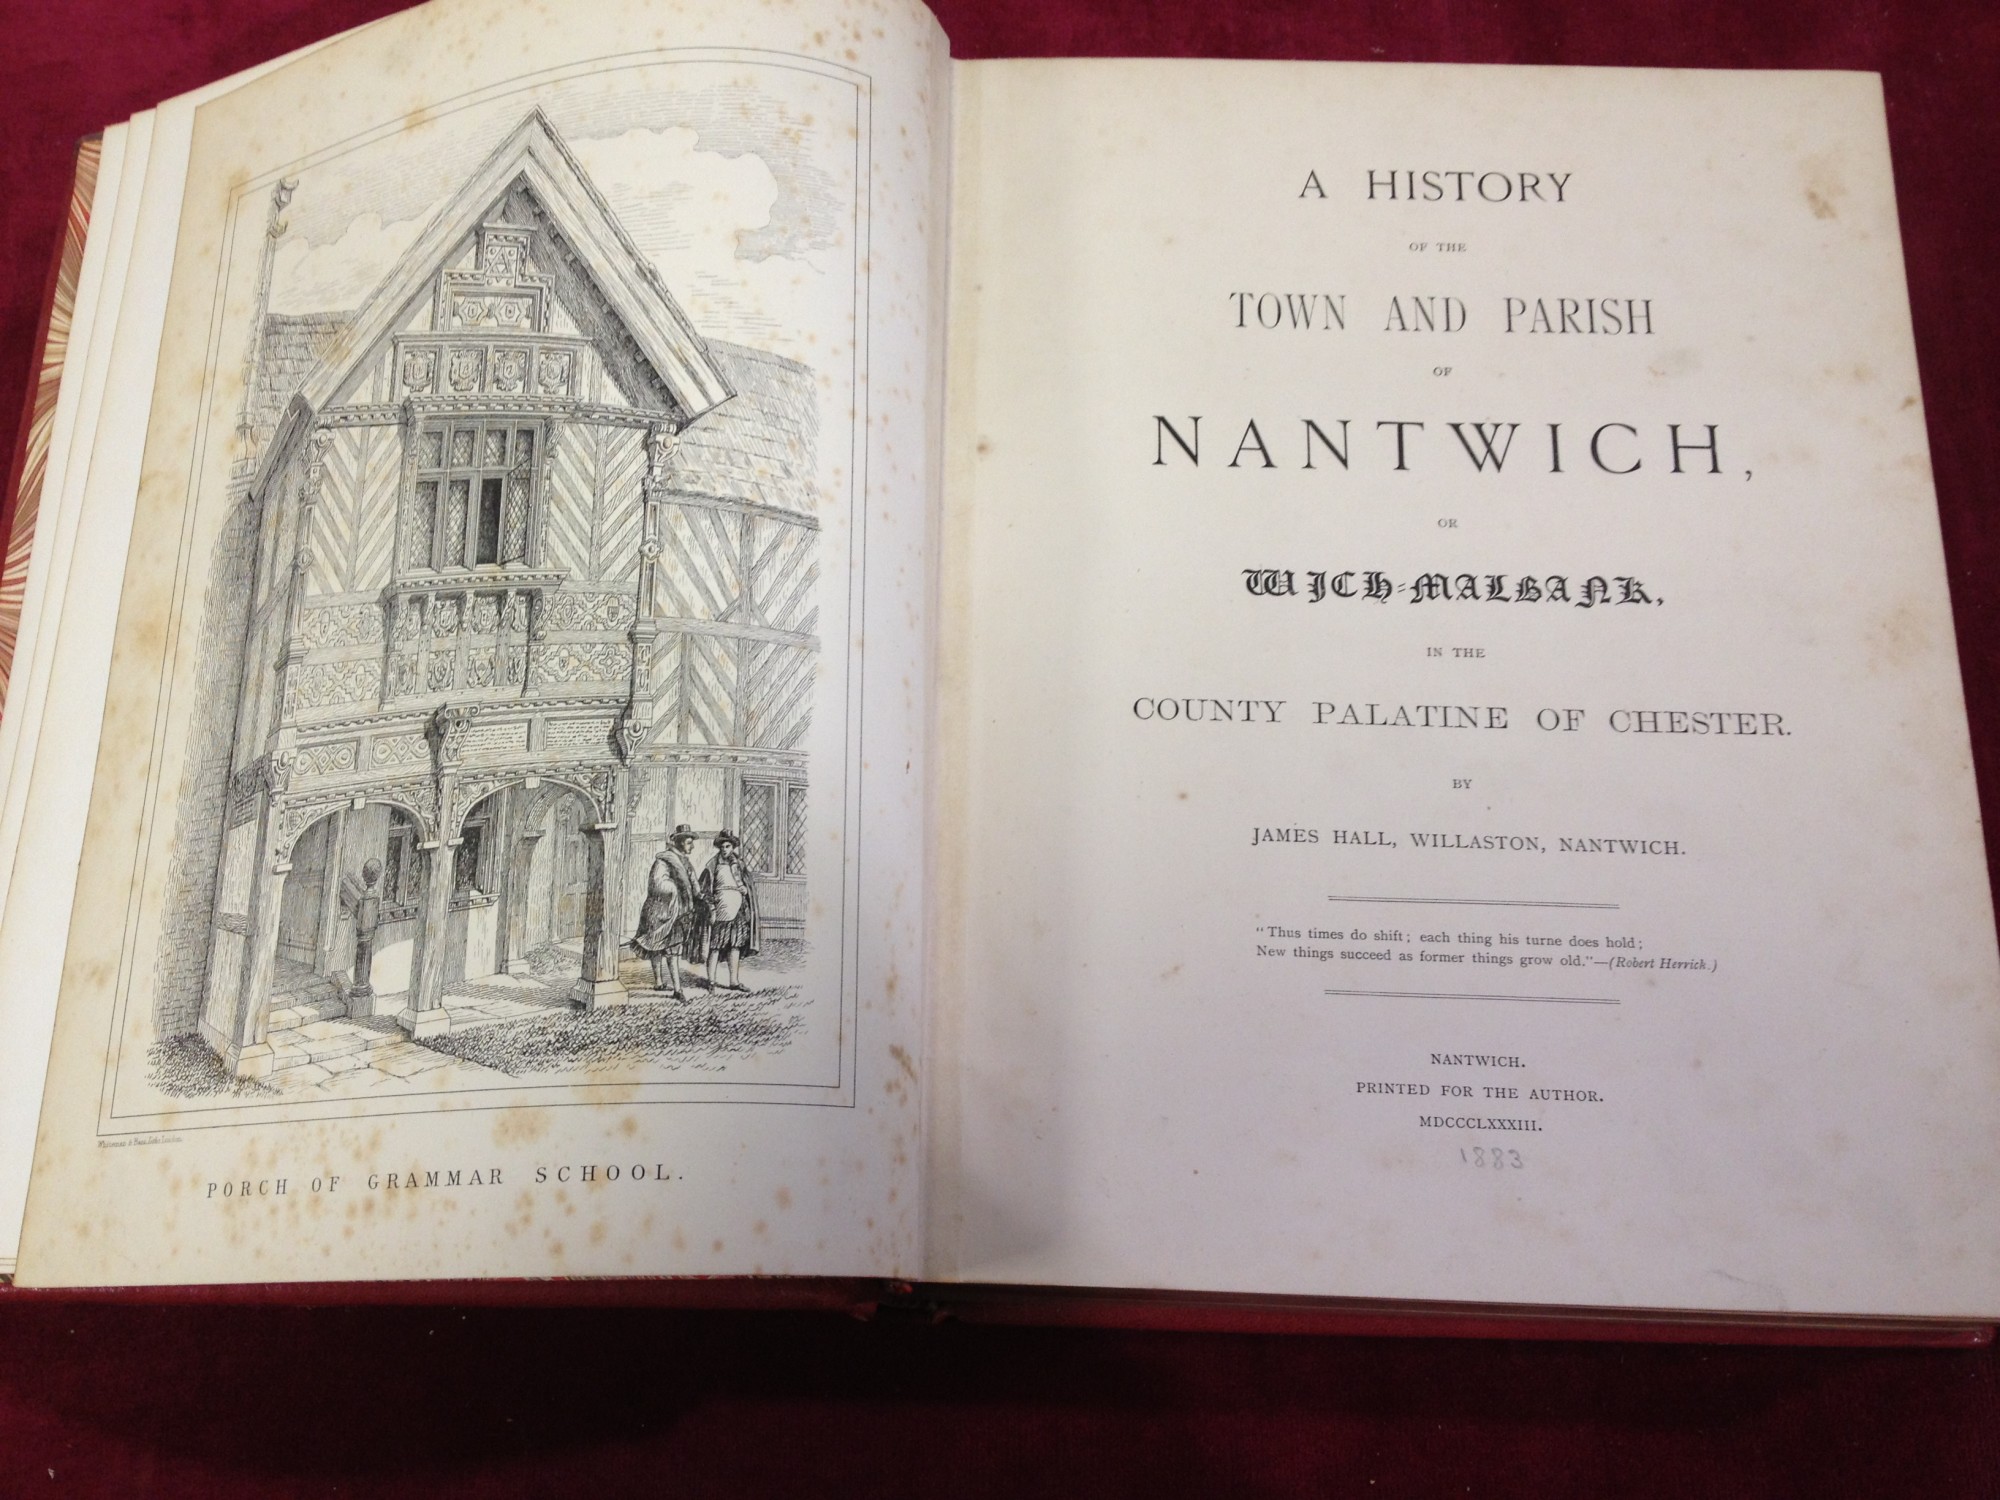 A history of the town and parish of Nantwich 1883